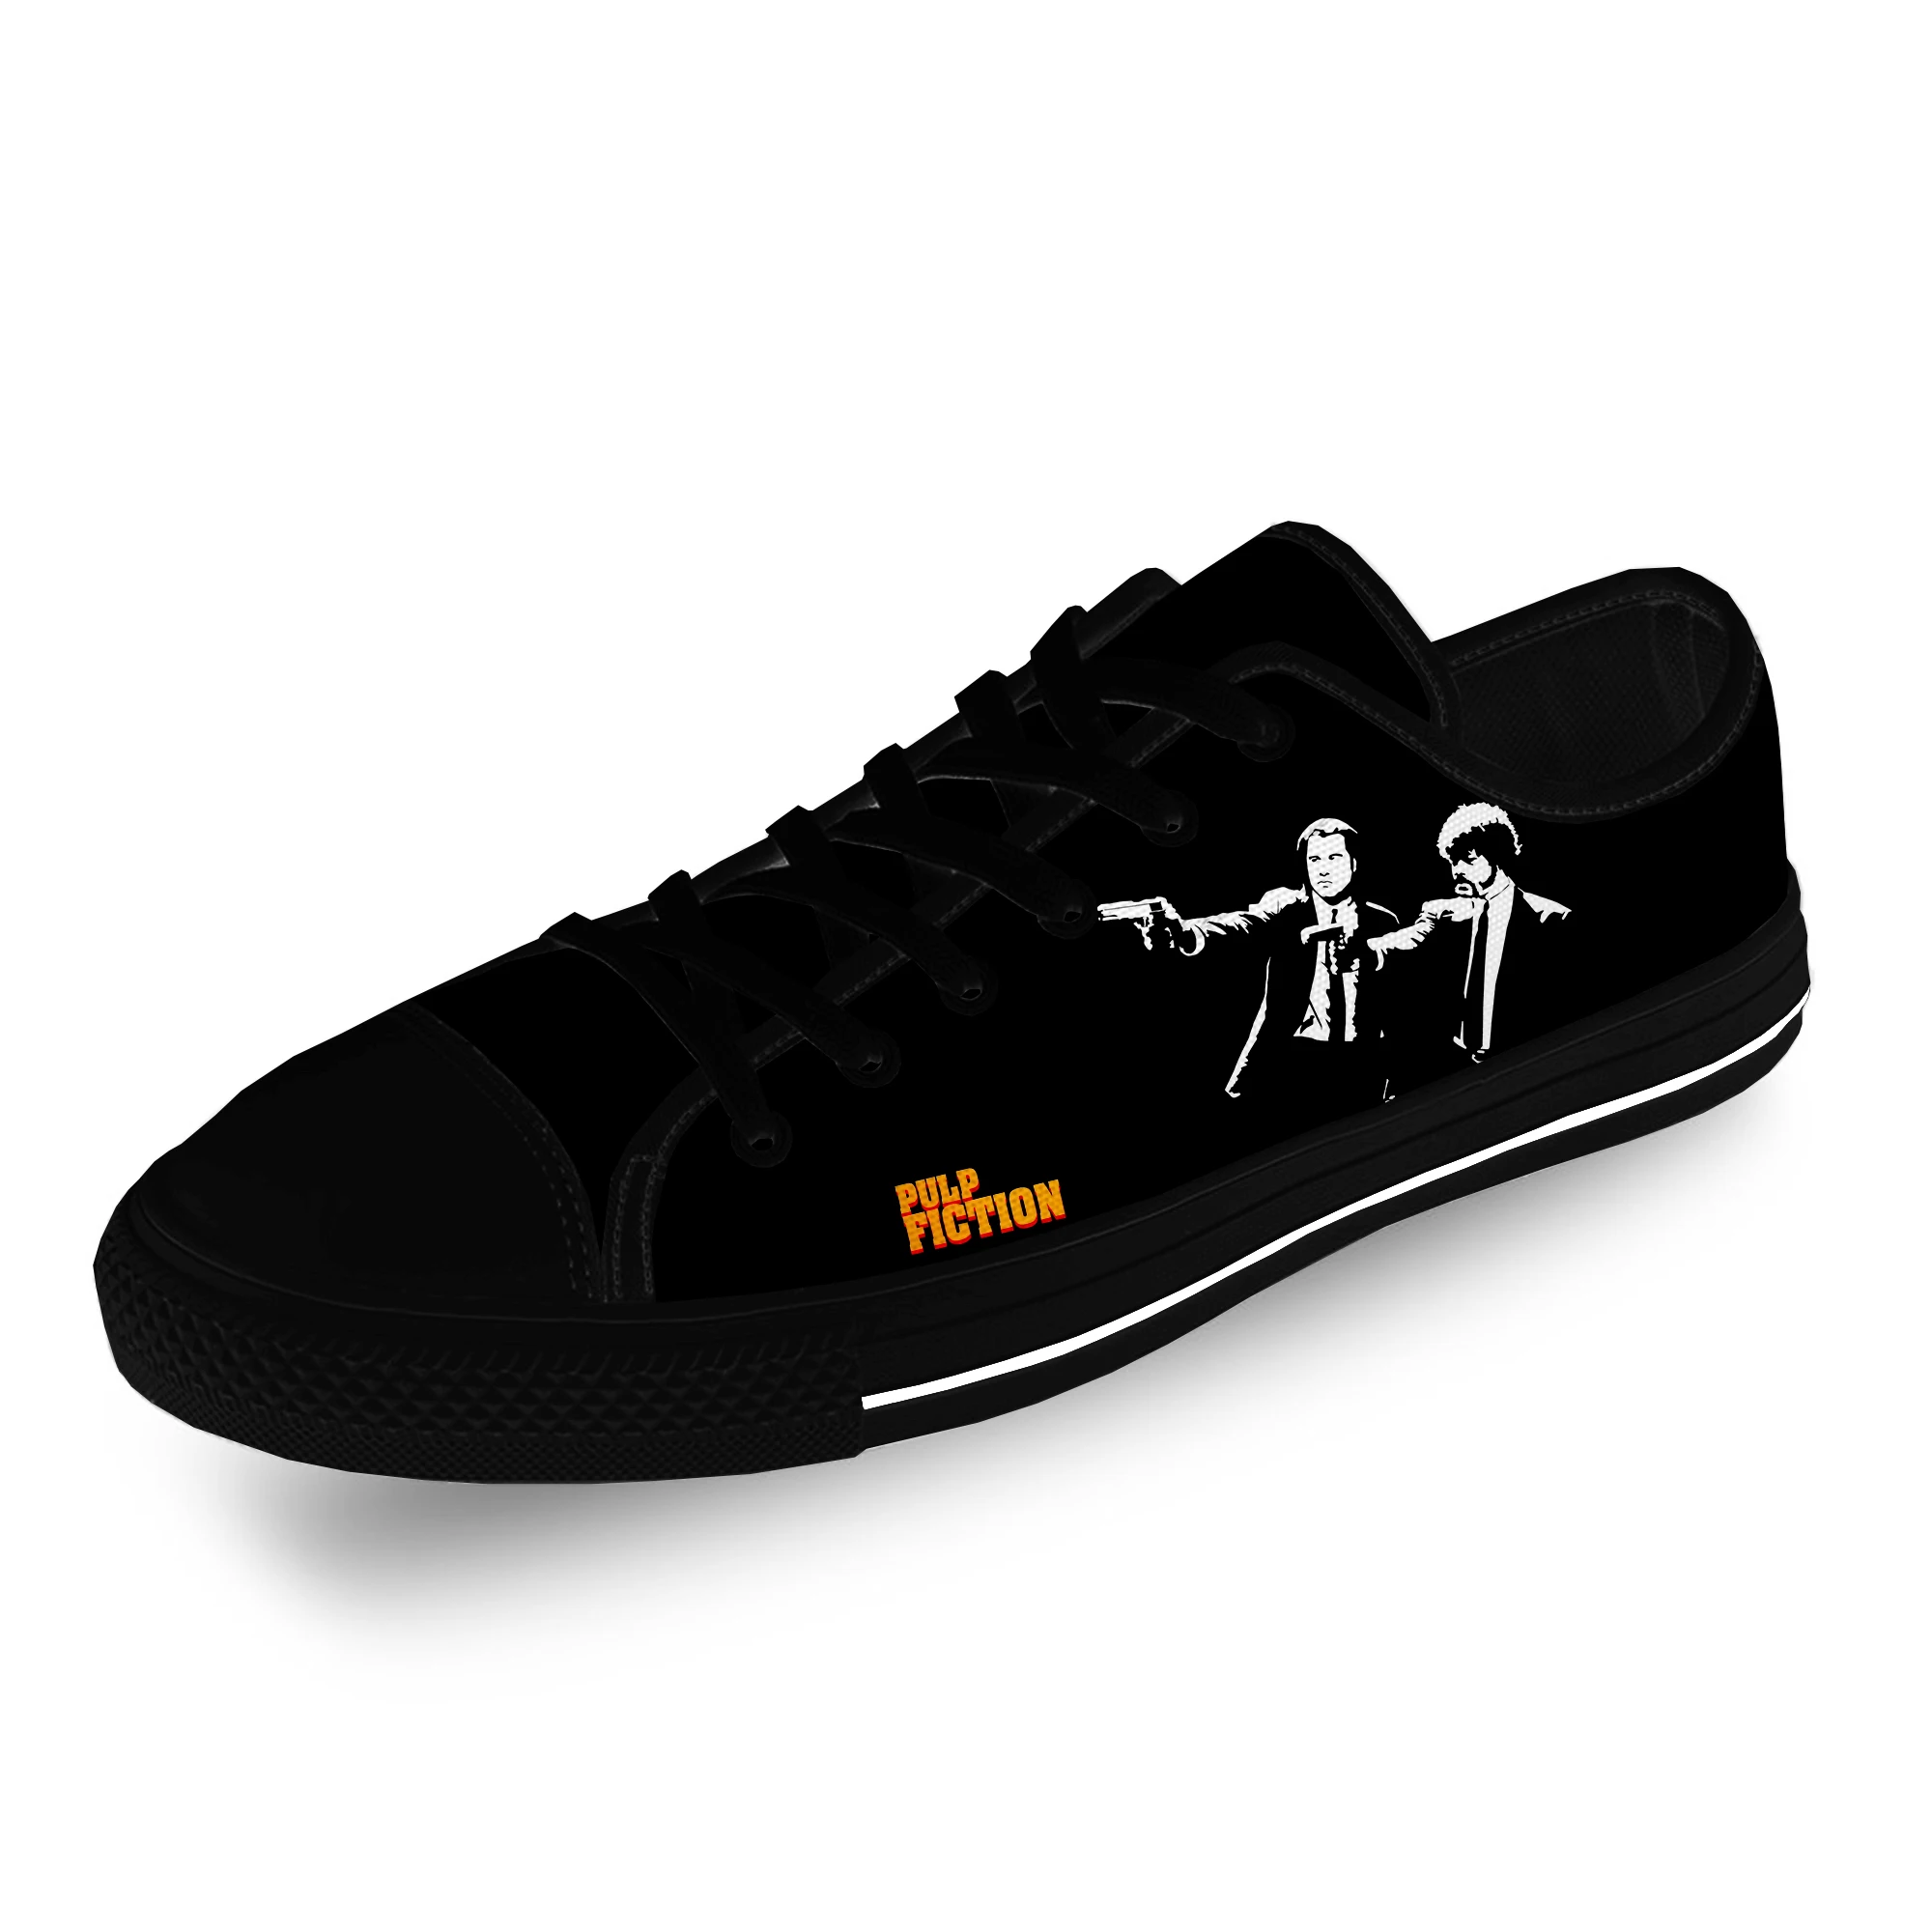 

Classic Movie Pulp Fiction Funny Casual Cloth Fashion 3D Print Low Top Canvas Shoes Men Women Lightweight Breathable Sneakers